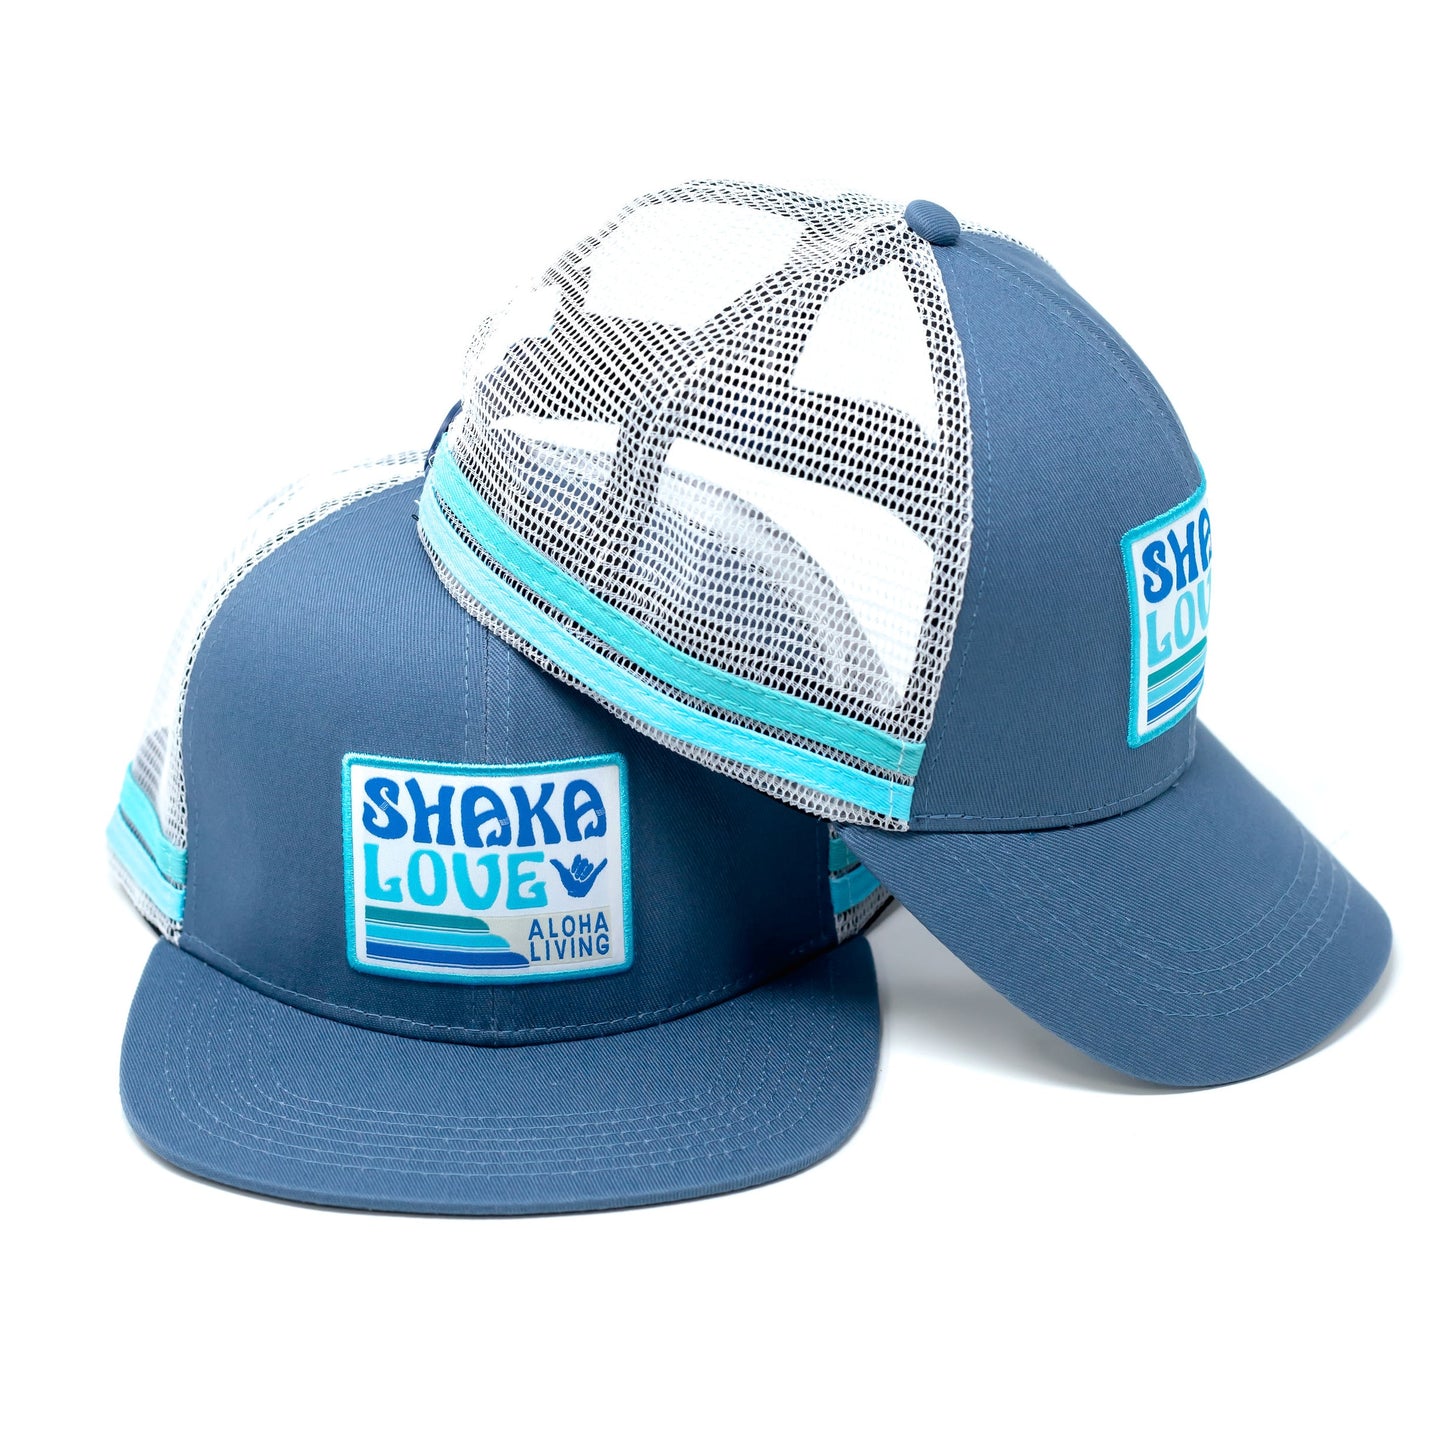 HAT Bundle Includes 2 Eco Surf Hats of Your Choice